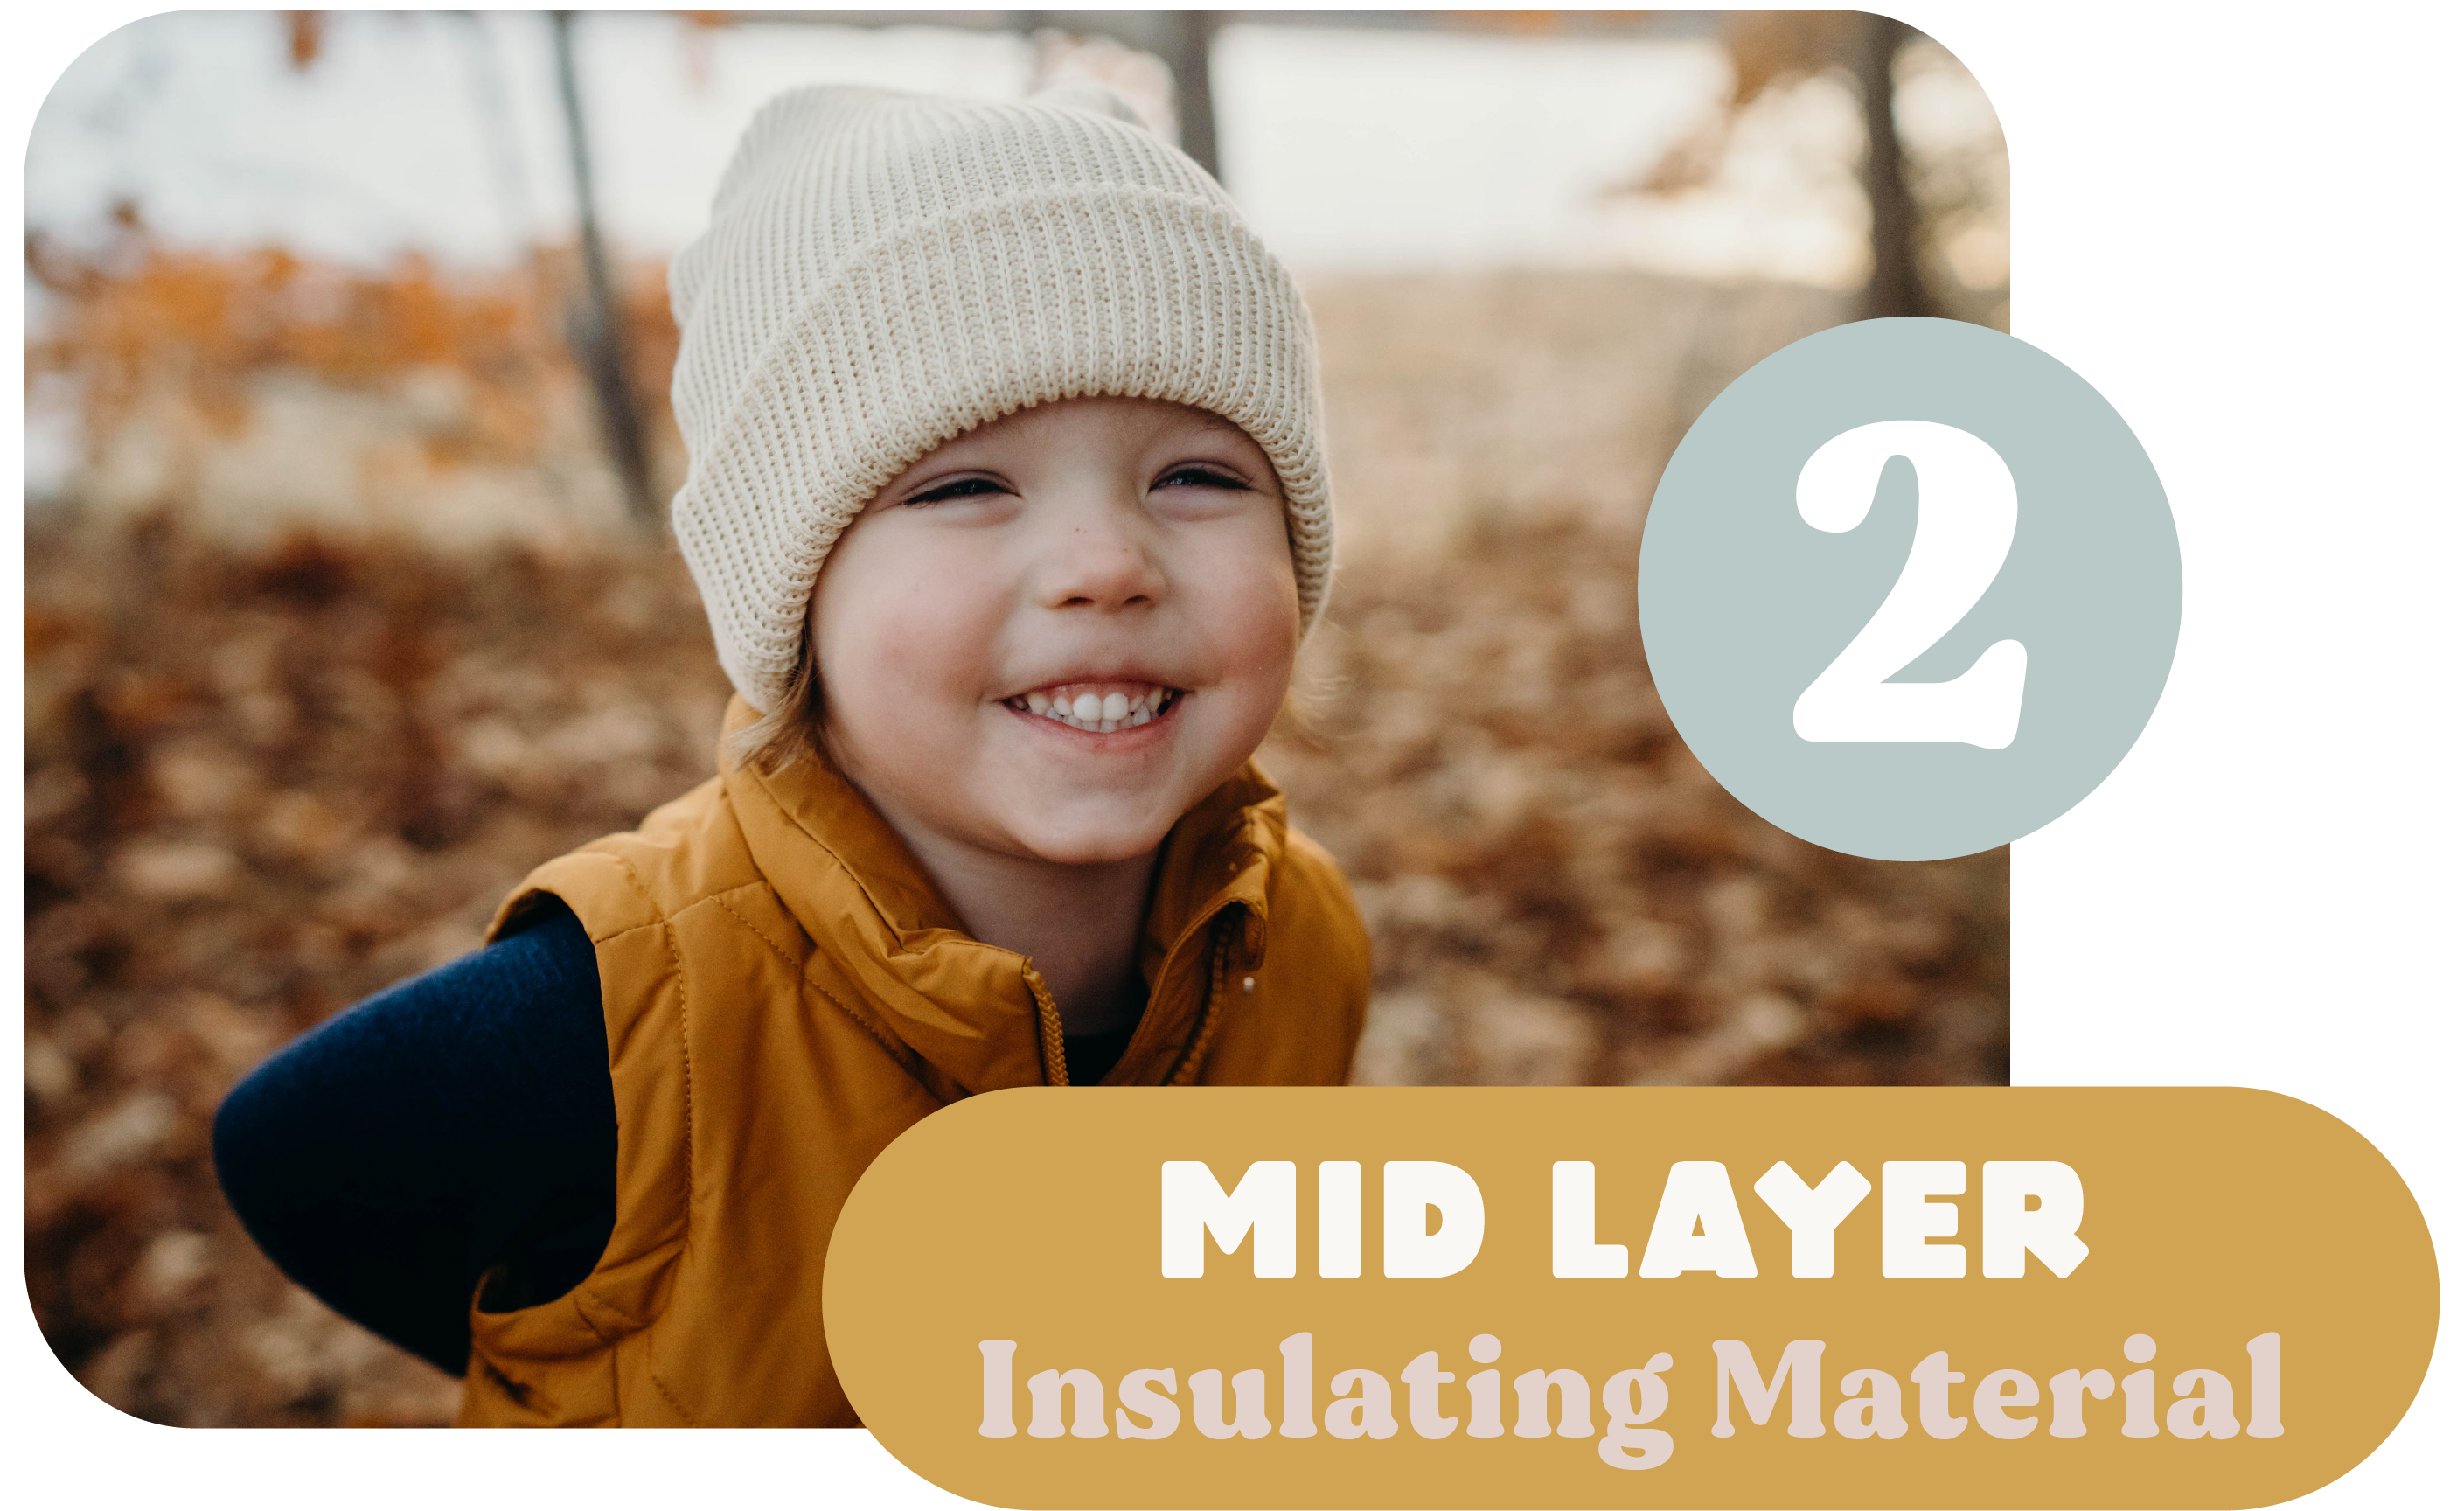 Layer 2: Mid Layer - Insulating Material